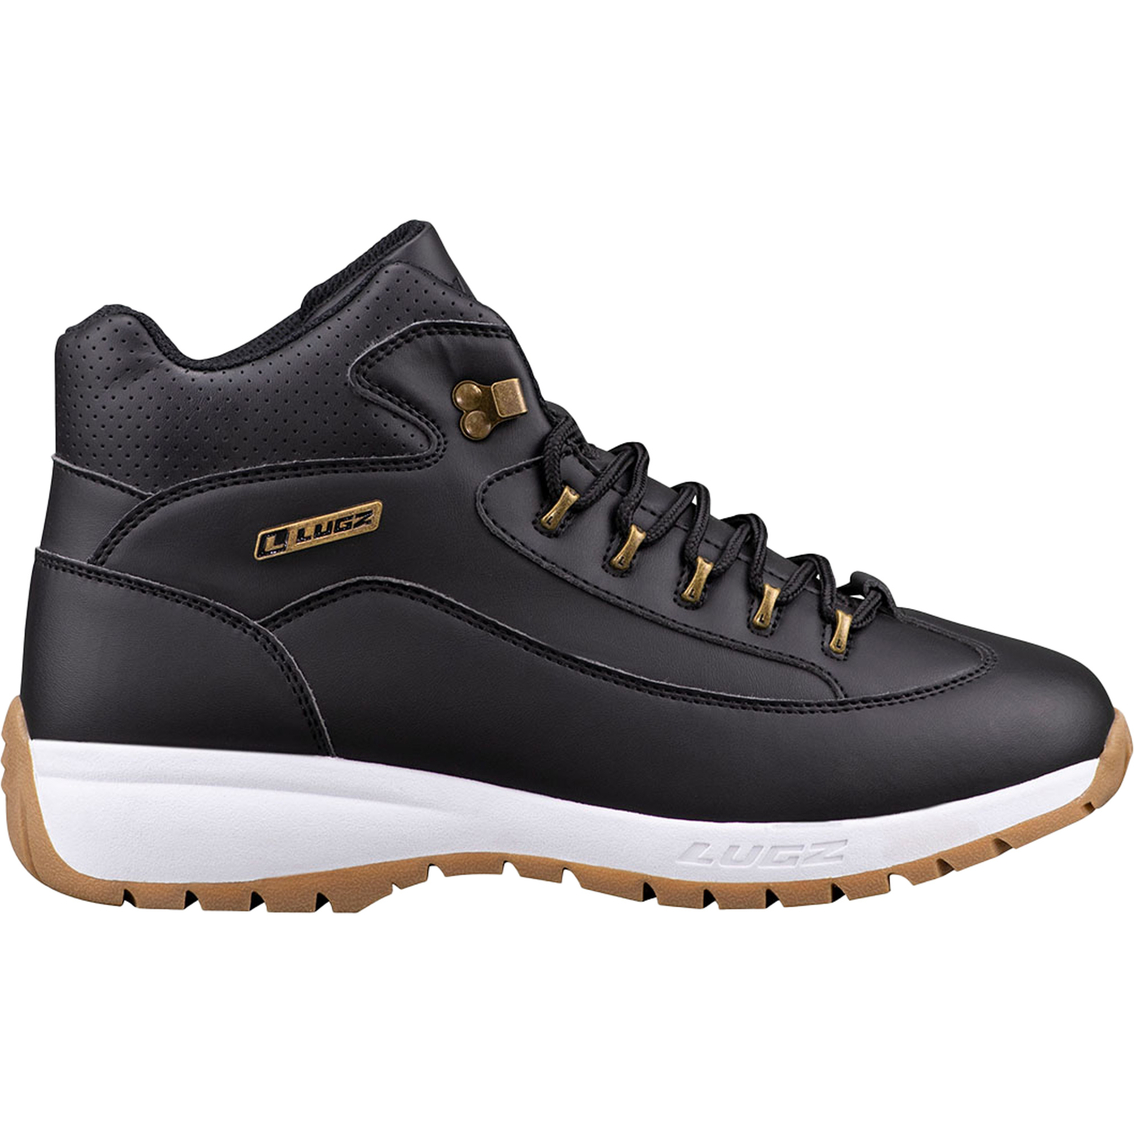 Lugz Rapid Sneakers - Image 2 of 7